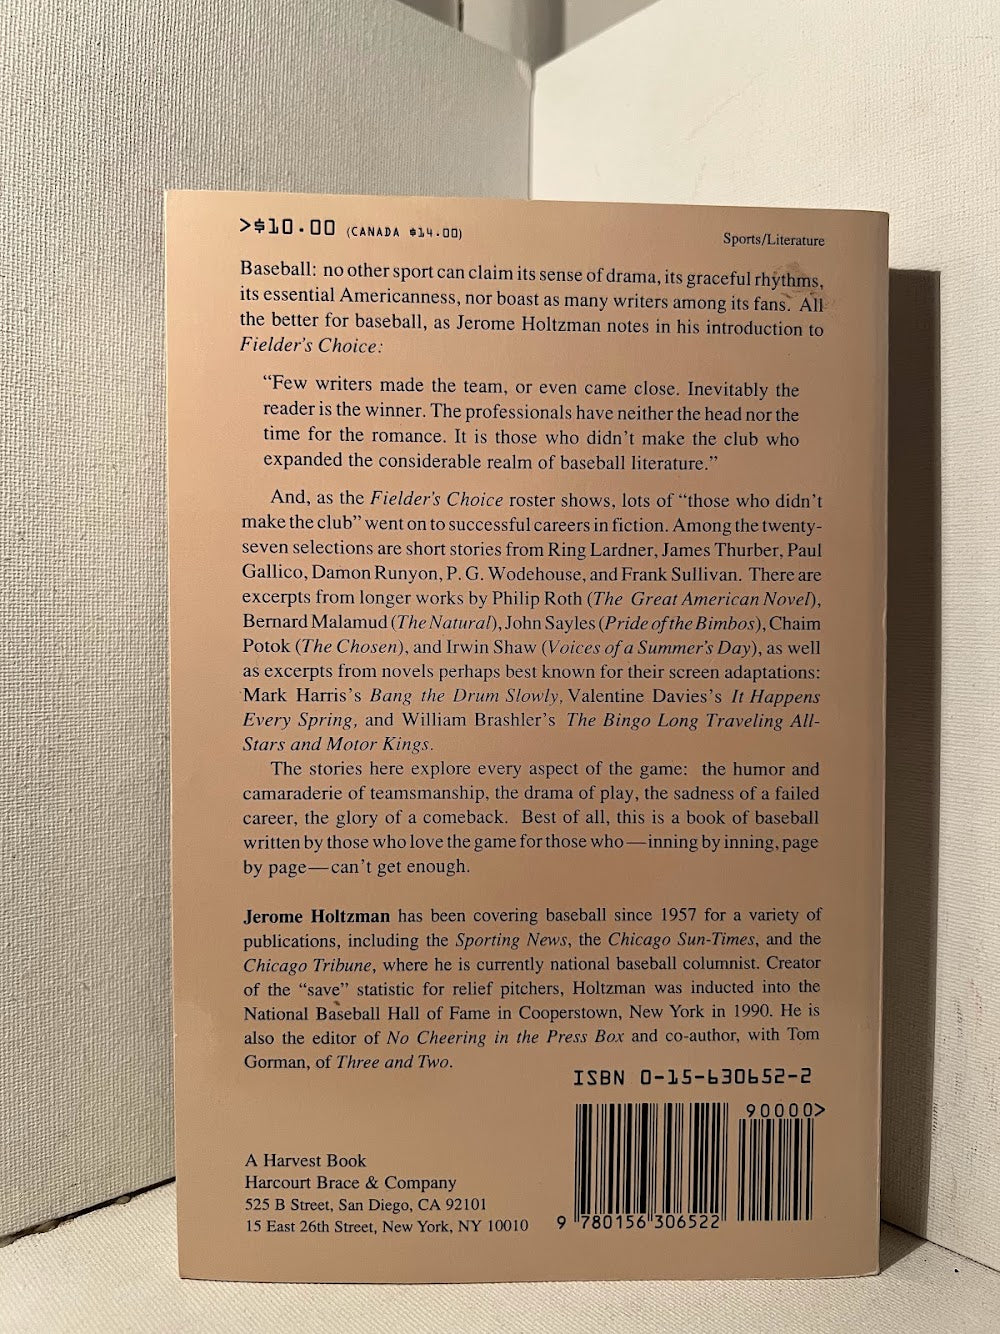 Fielder's Choice: An Anthology of Baseball Fiction edited by Jerome Holtzman